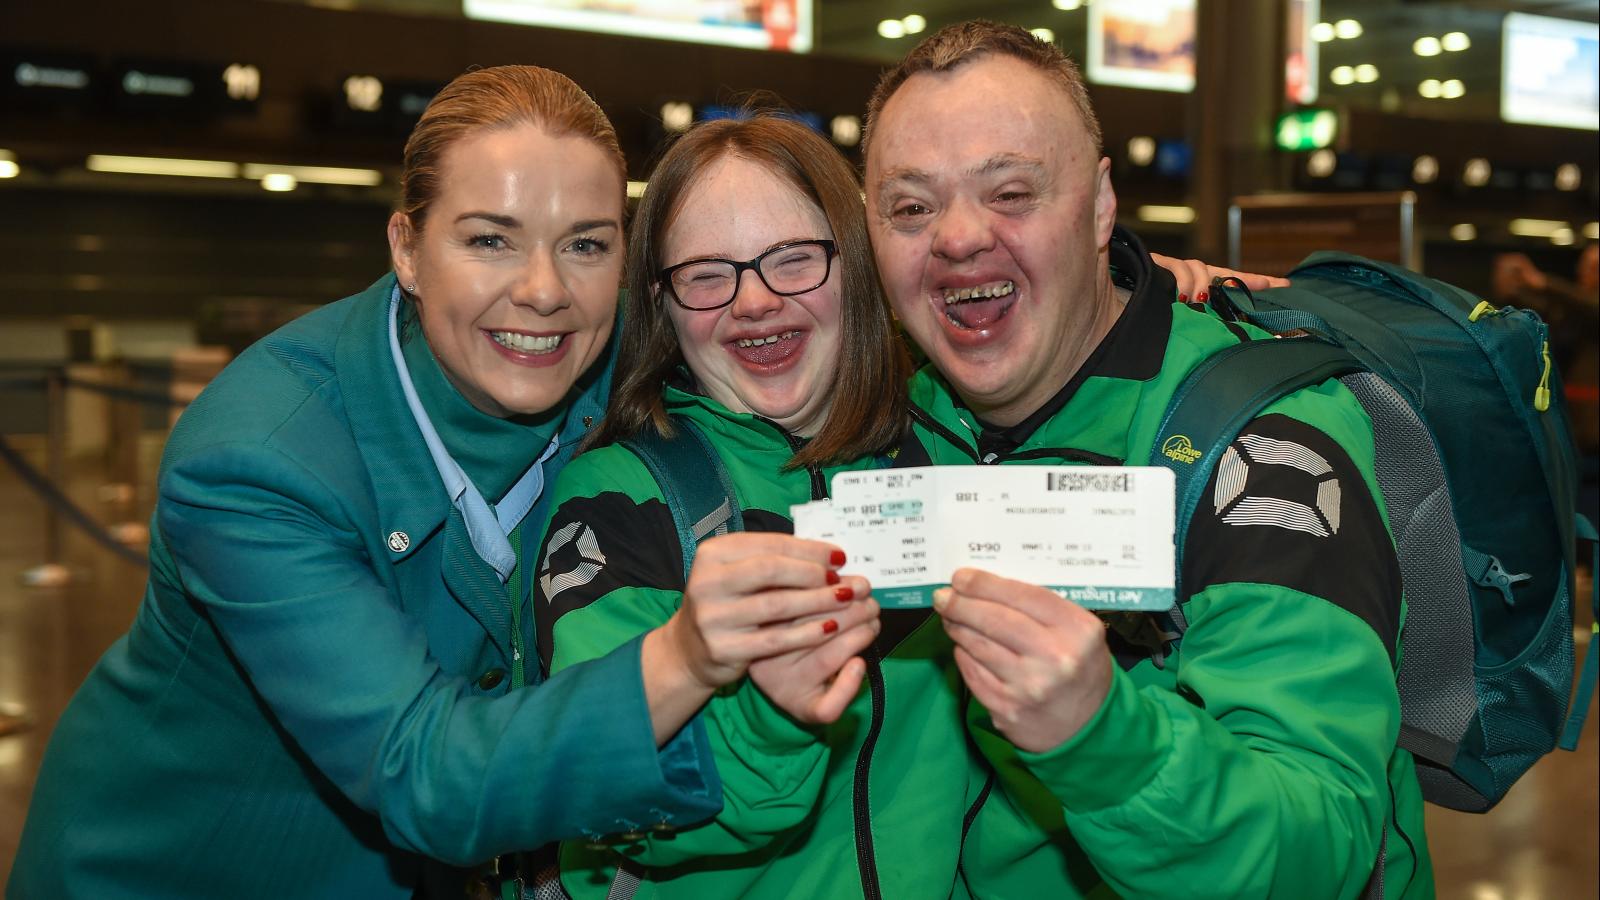 Aer Lingus air hostess and two special olympics athletes at the airport